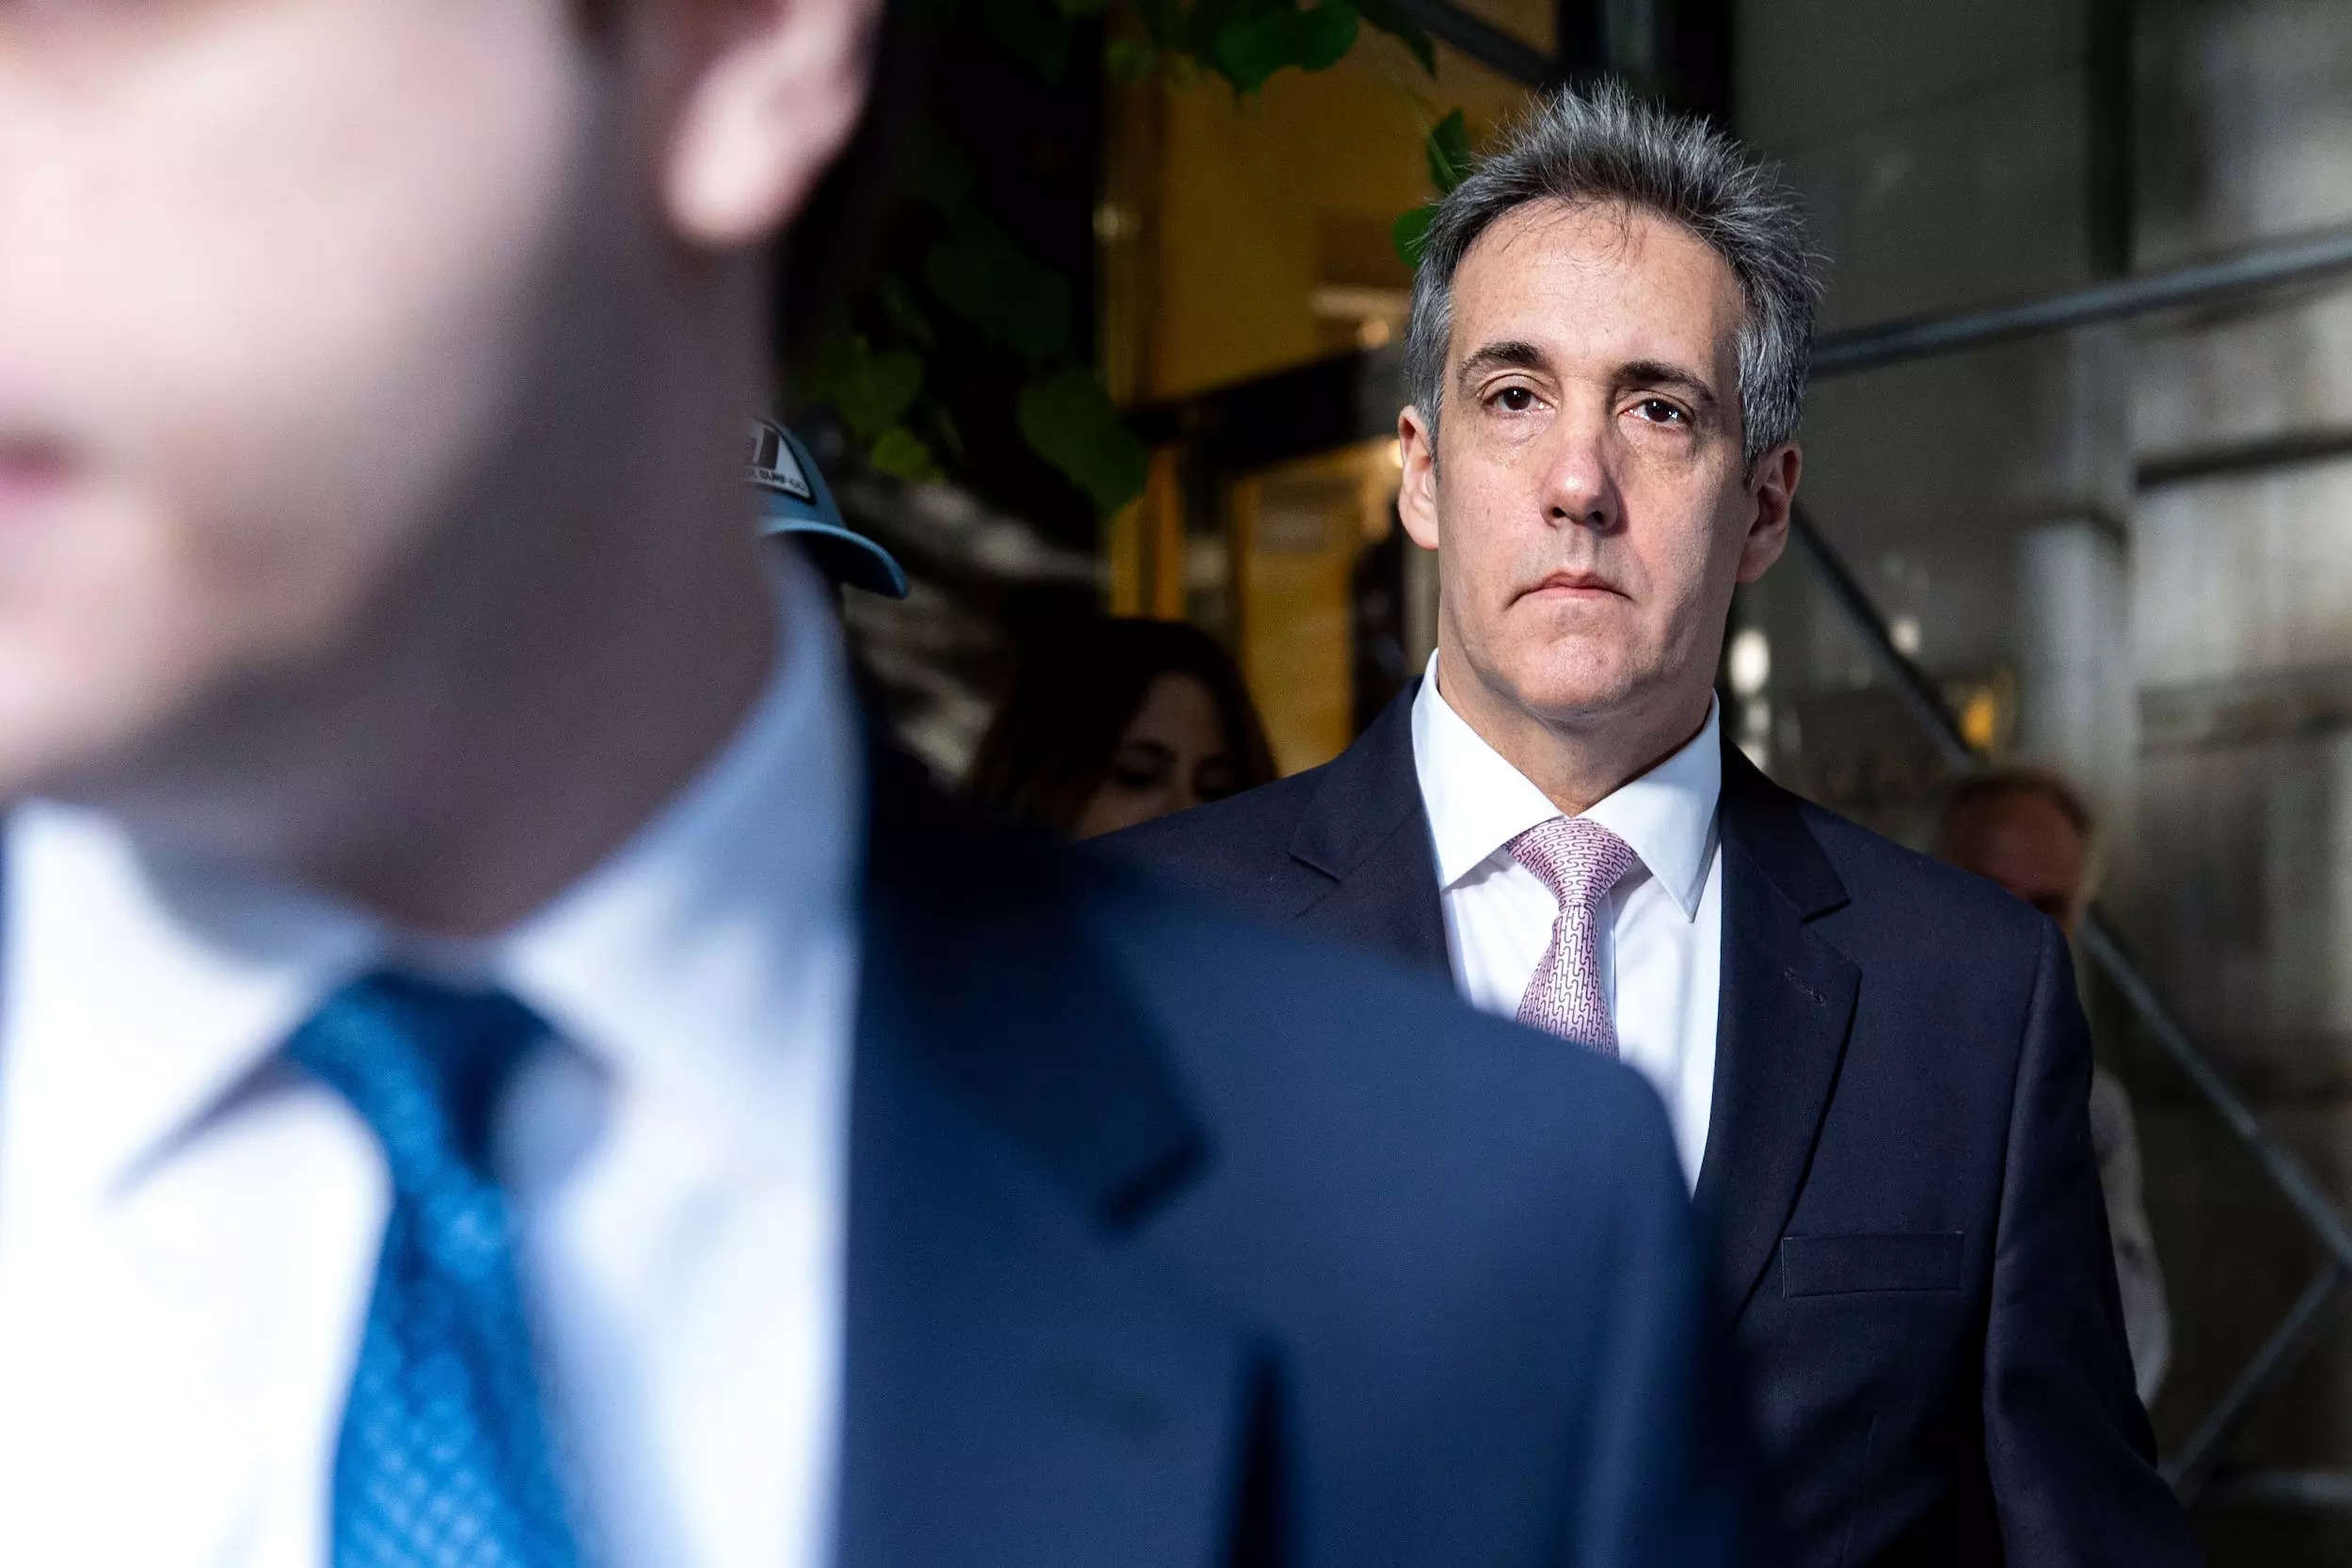 Michael Cohen is shown leaving his apartment to attend the hush money trial in New York.